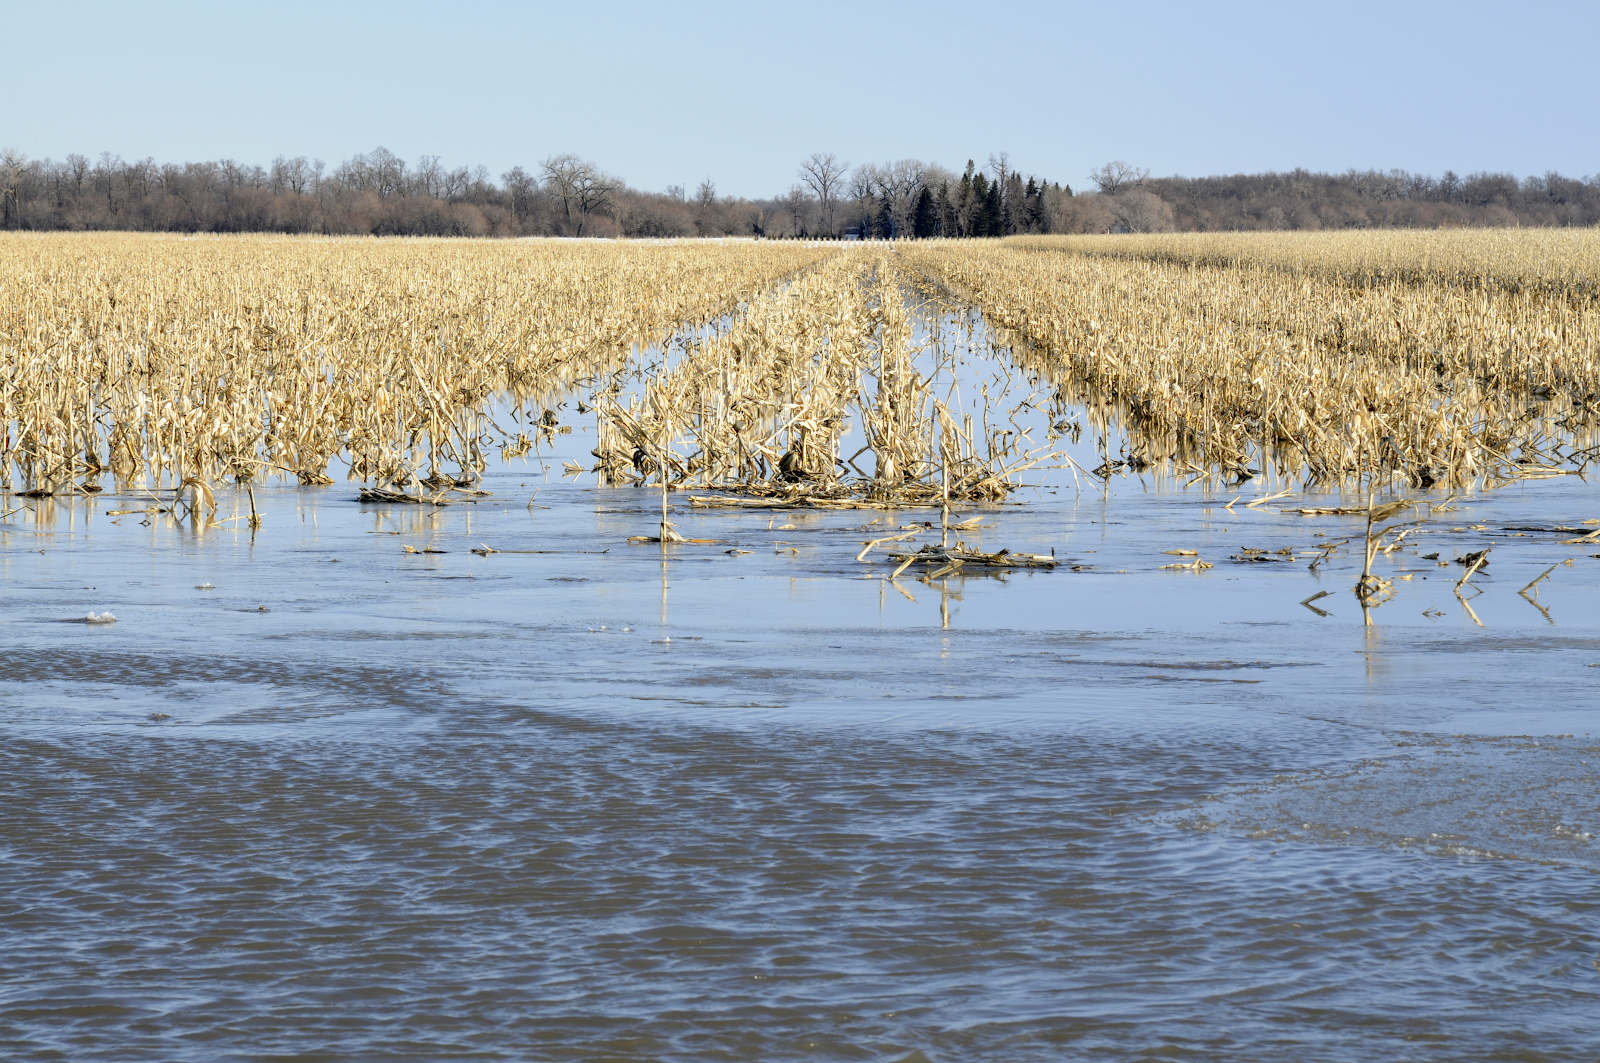 "Farmland being flooded by Missouri and Red Rivers in North Dakota" by Good Free Photos is in the Public Domain, CC0